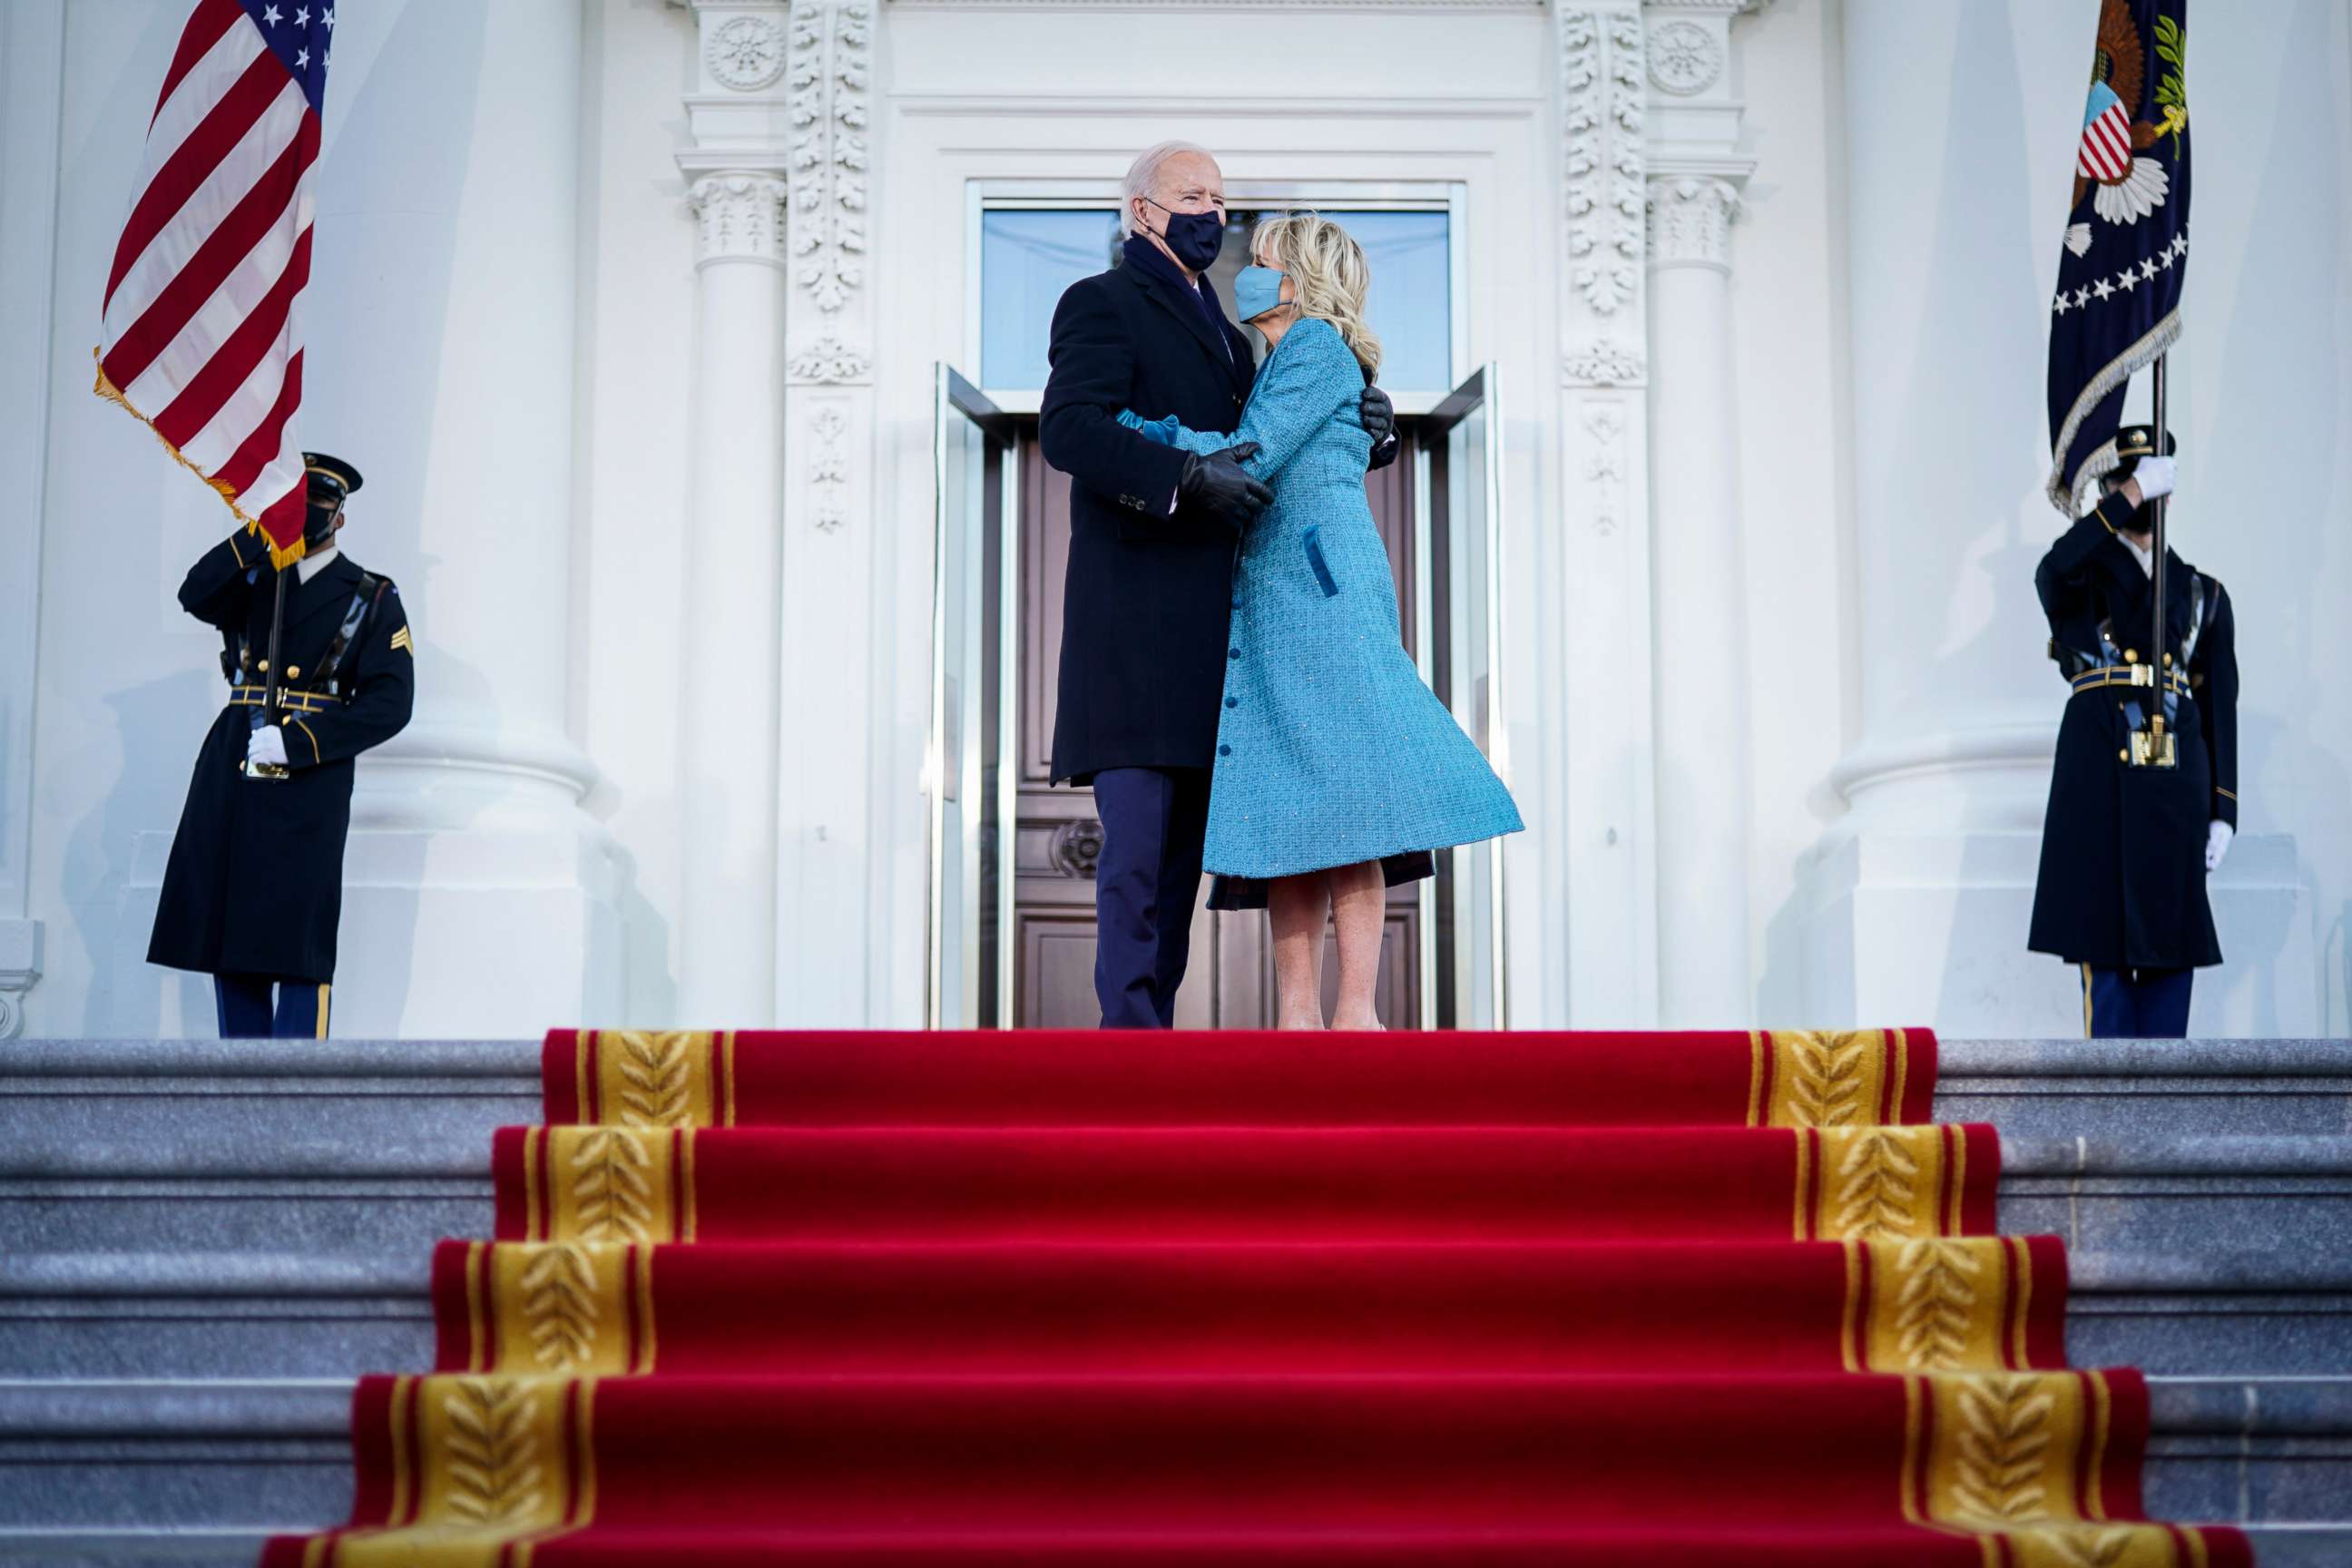 PHOTO: President Joe Biden and first lady Jill Biden hug at the entrance to the White House on Inauguration day, Jan. 20, 2021, in Washington.